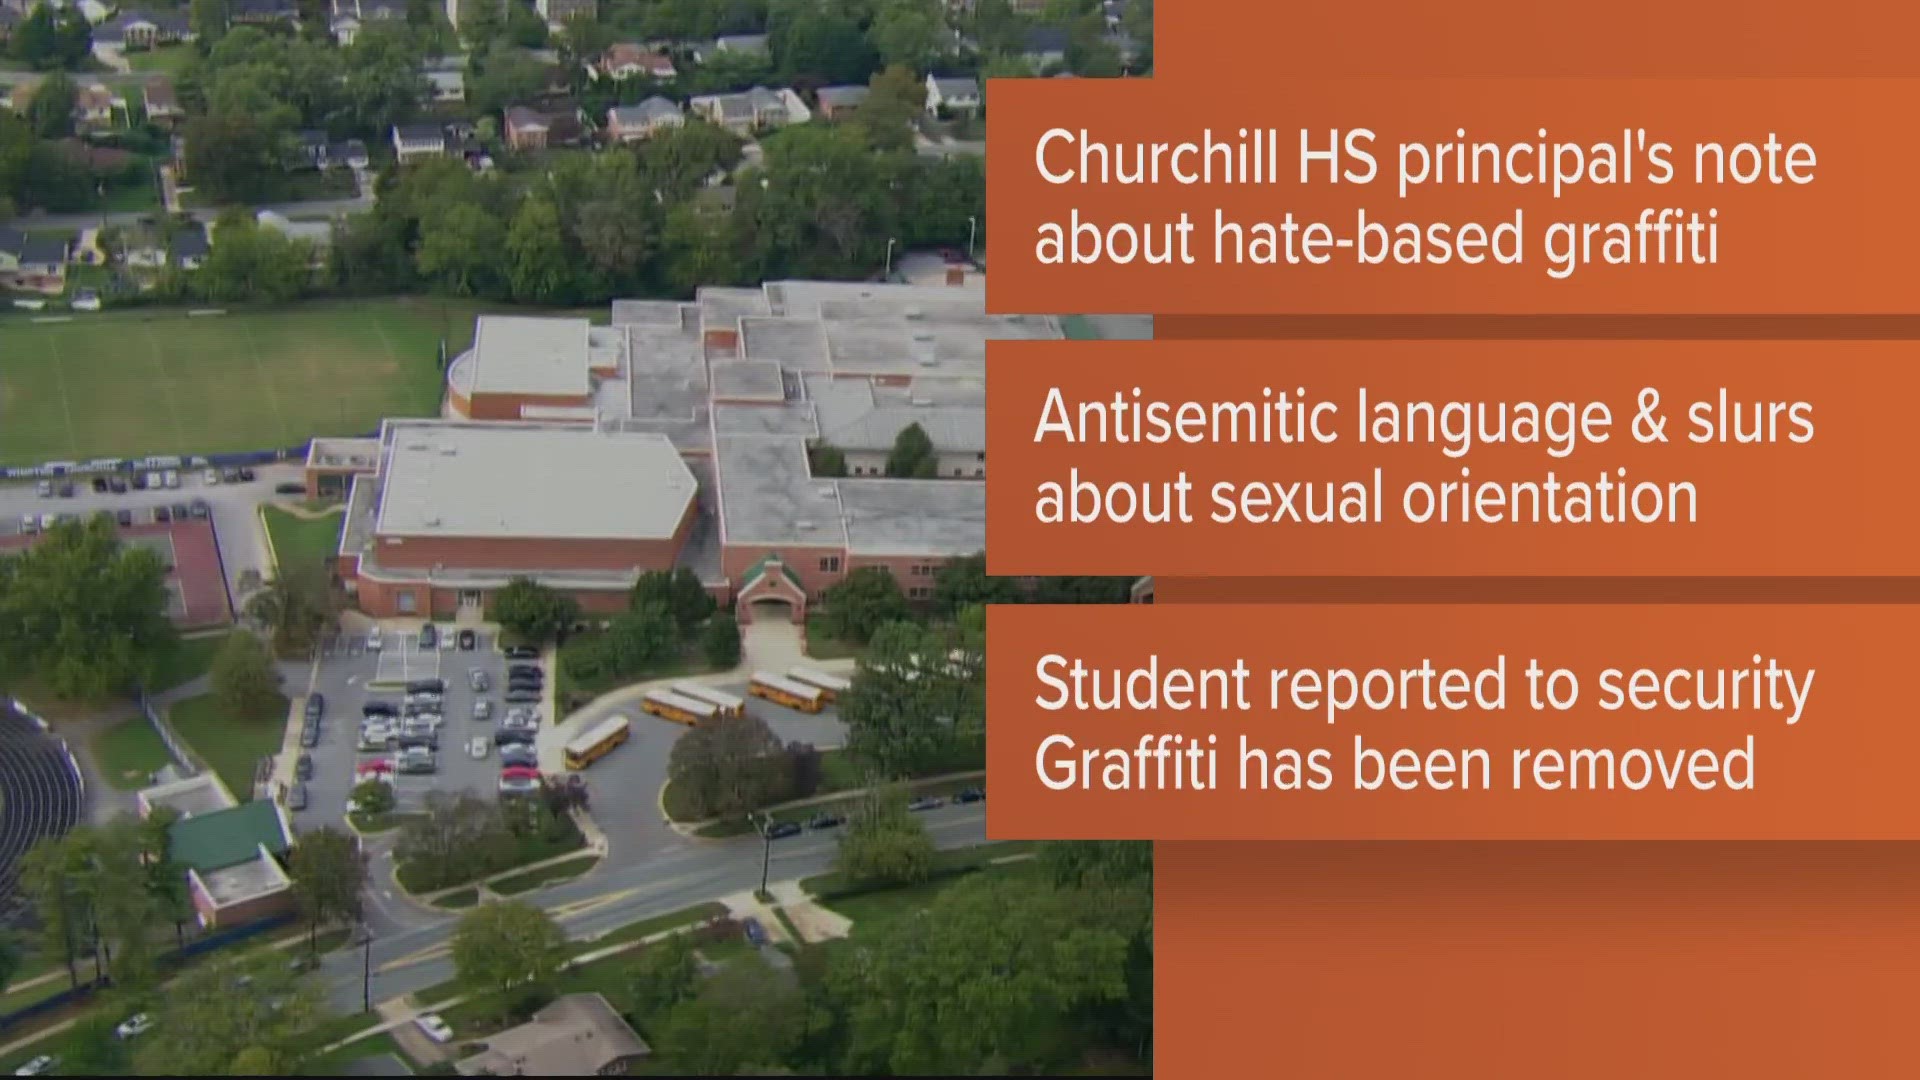 A graffiti in the girl's bathroom contained antisemitic language and slurs about sexual orientation, according to the principal.